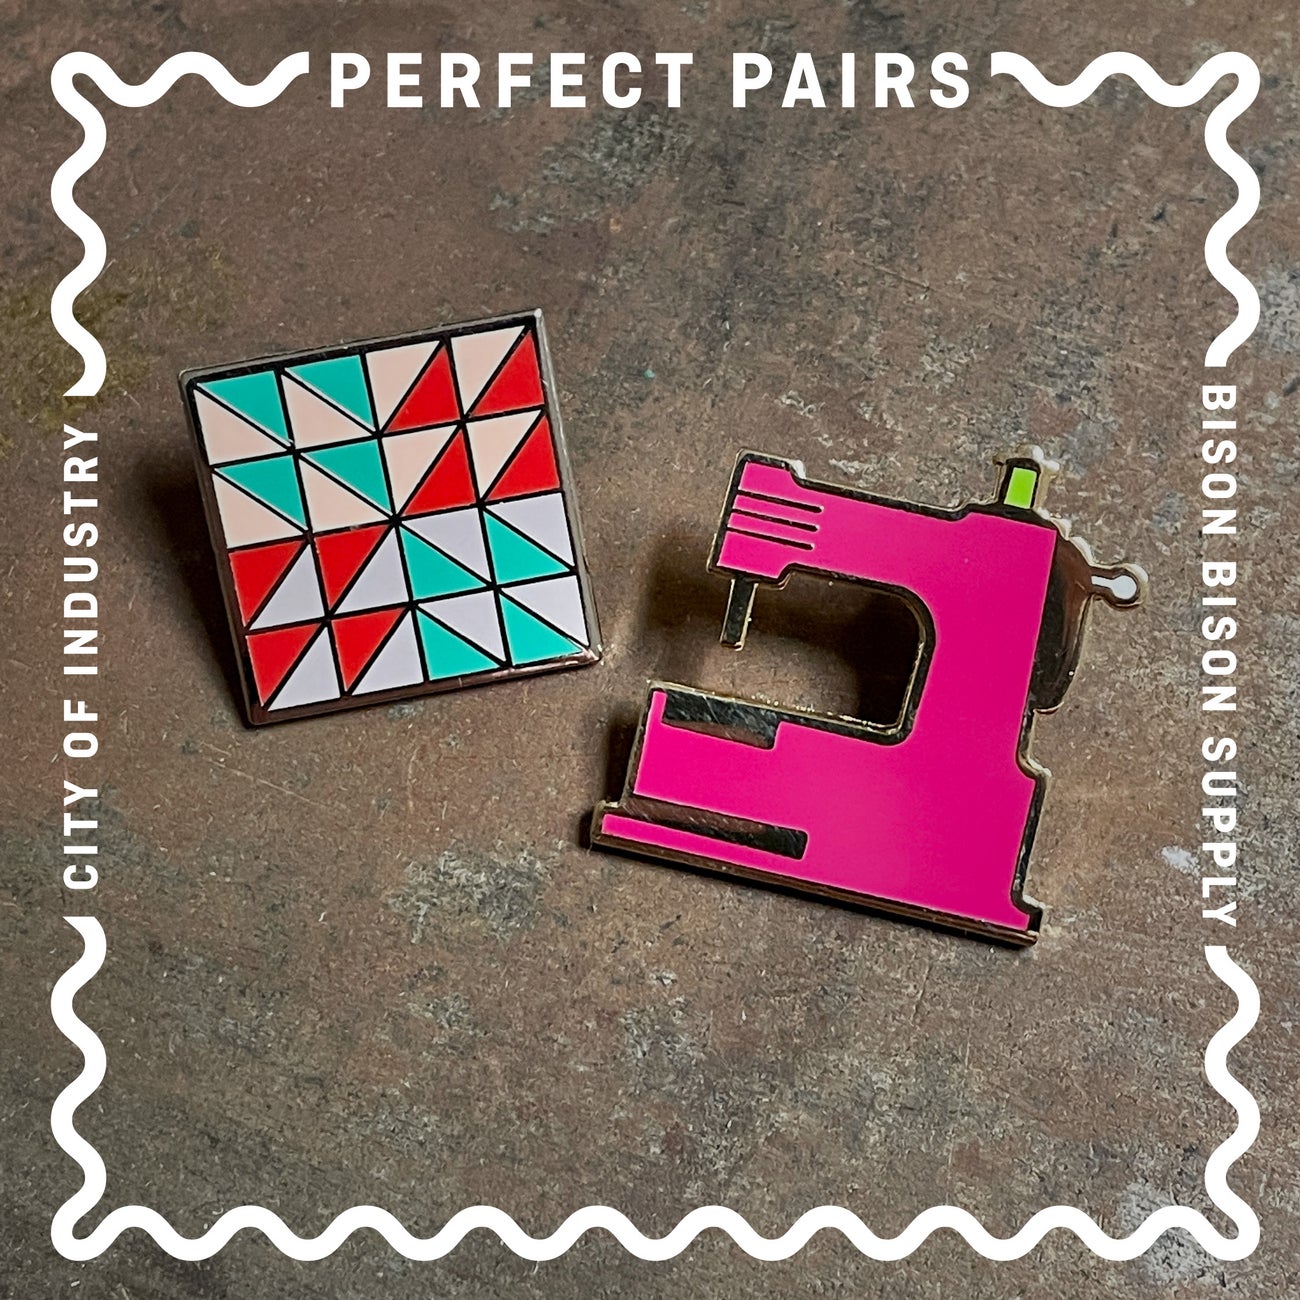 Image of Perfect Pairs: Sewing Machine + Quilt Block